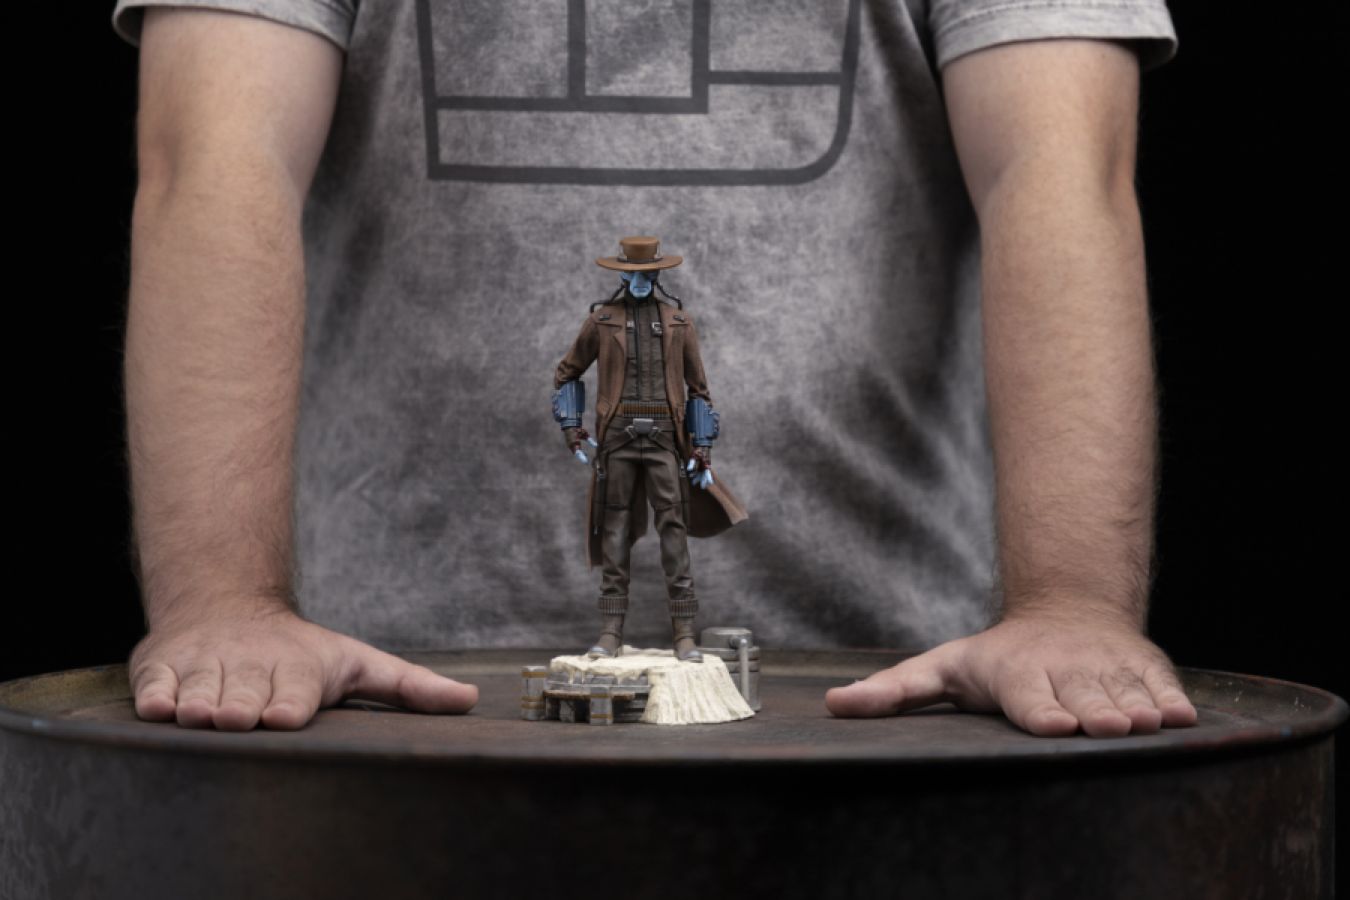 Star Wars: Book of Boba Fett - Cad Bane 1:10 Scale Statue